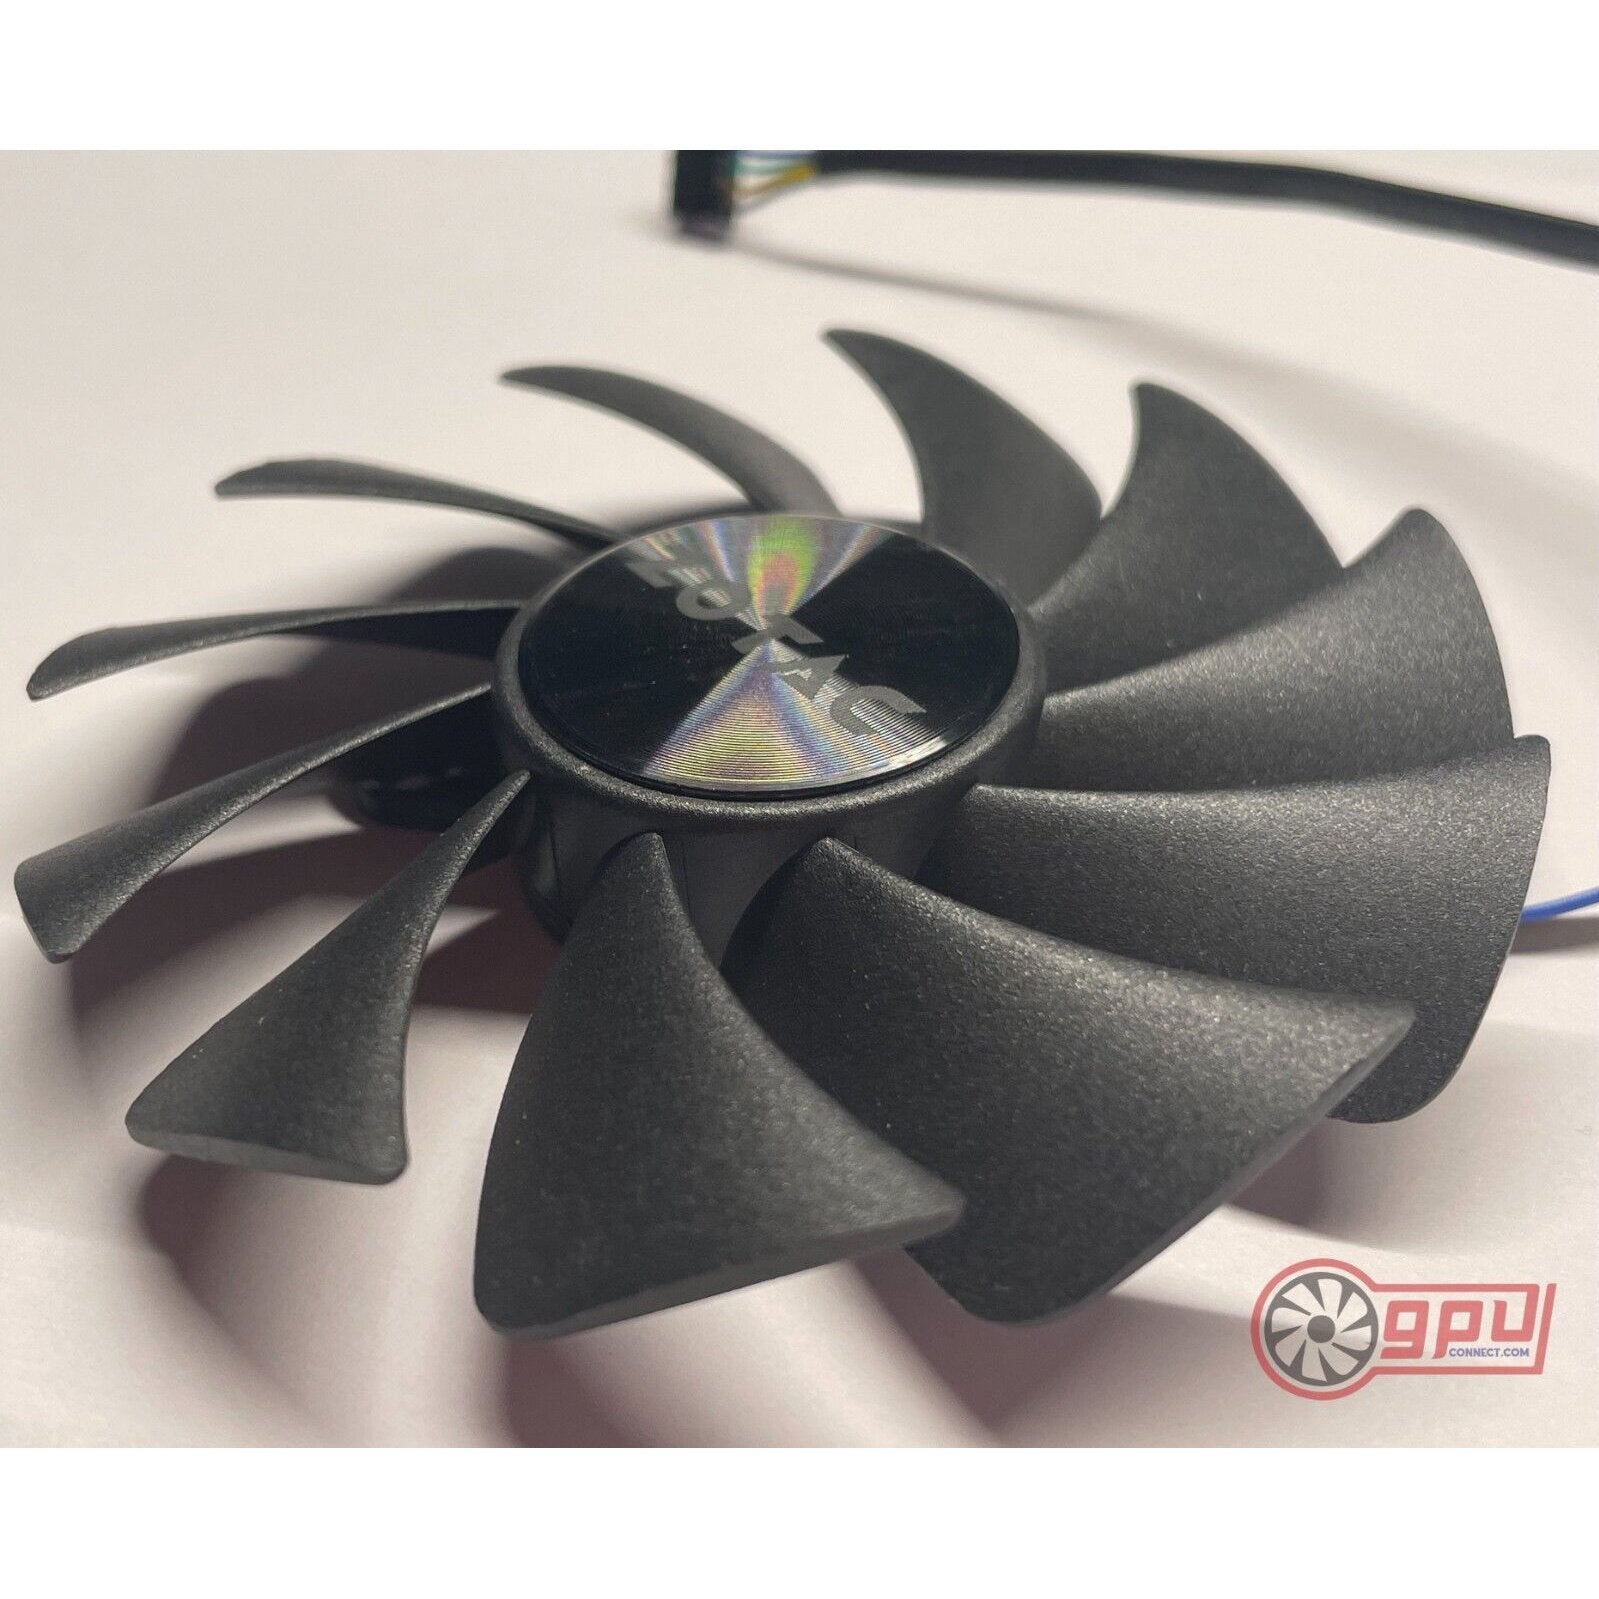 Zotac GAMING RTX  Ti OC Twin Edge   Replacement Cooling Fans